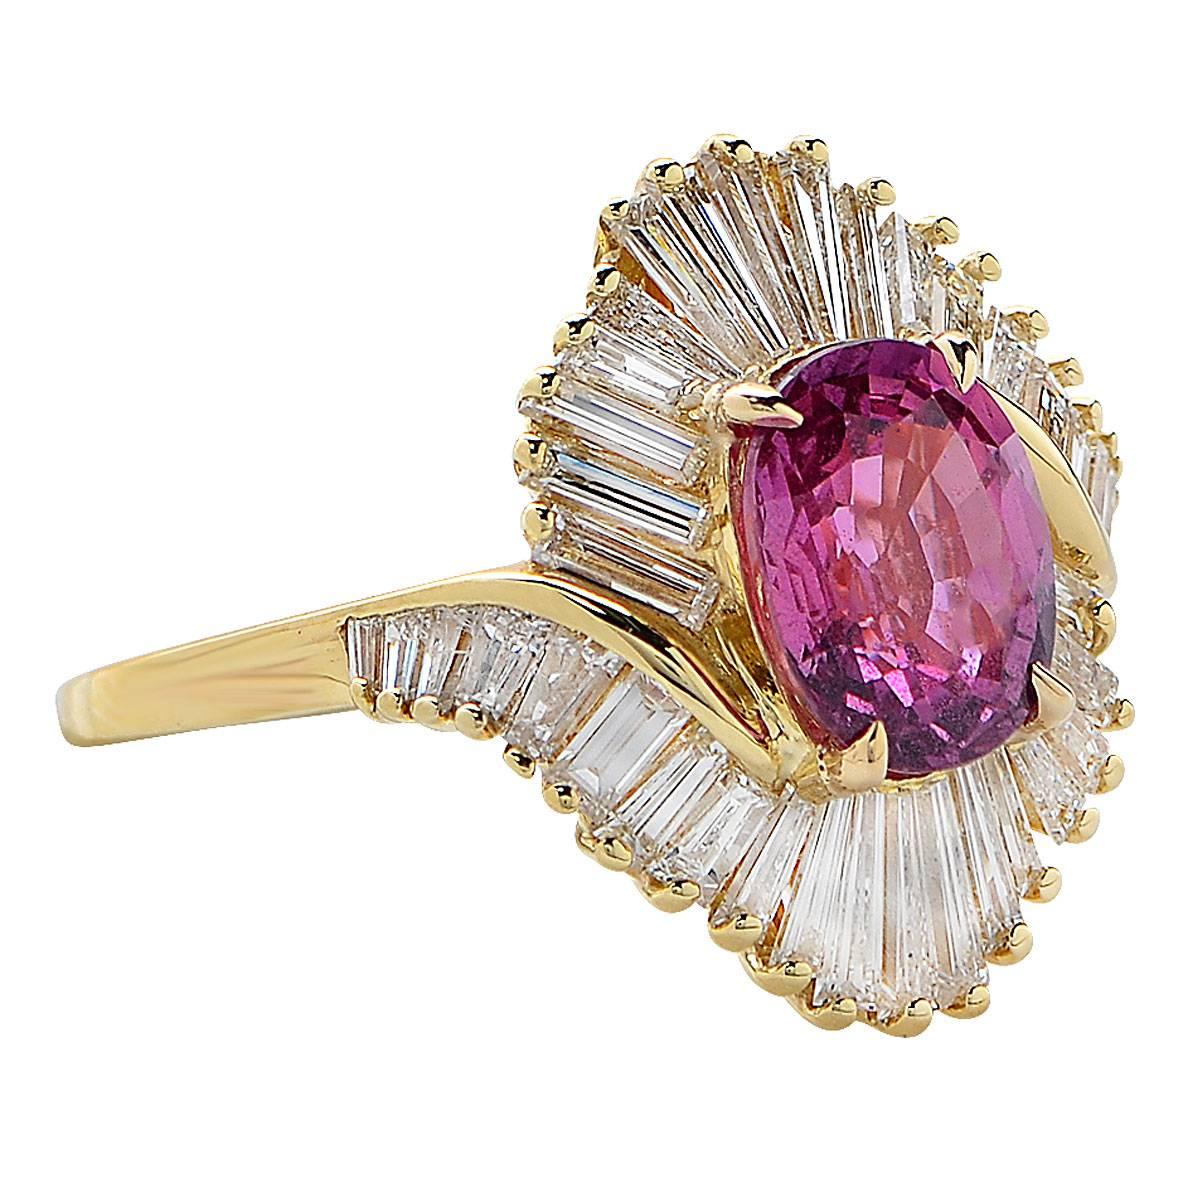 18k yellow gold ring featuring a natural pink sapphire weighing 2.62cts and accented by 38 baguette cut diamonds weighing approximately 2.50cts, G-H color, VS clarity.

Ring size: 5.5
Weight: 13.68 grams

This sapphire and diamond ring is